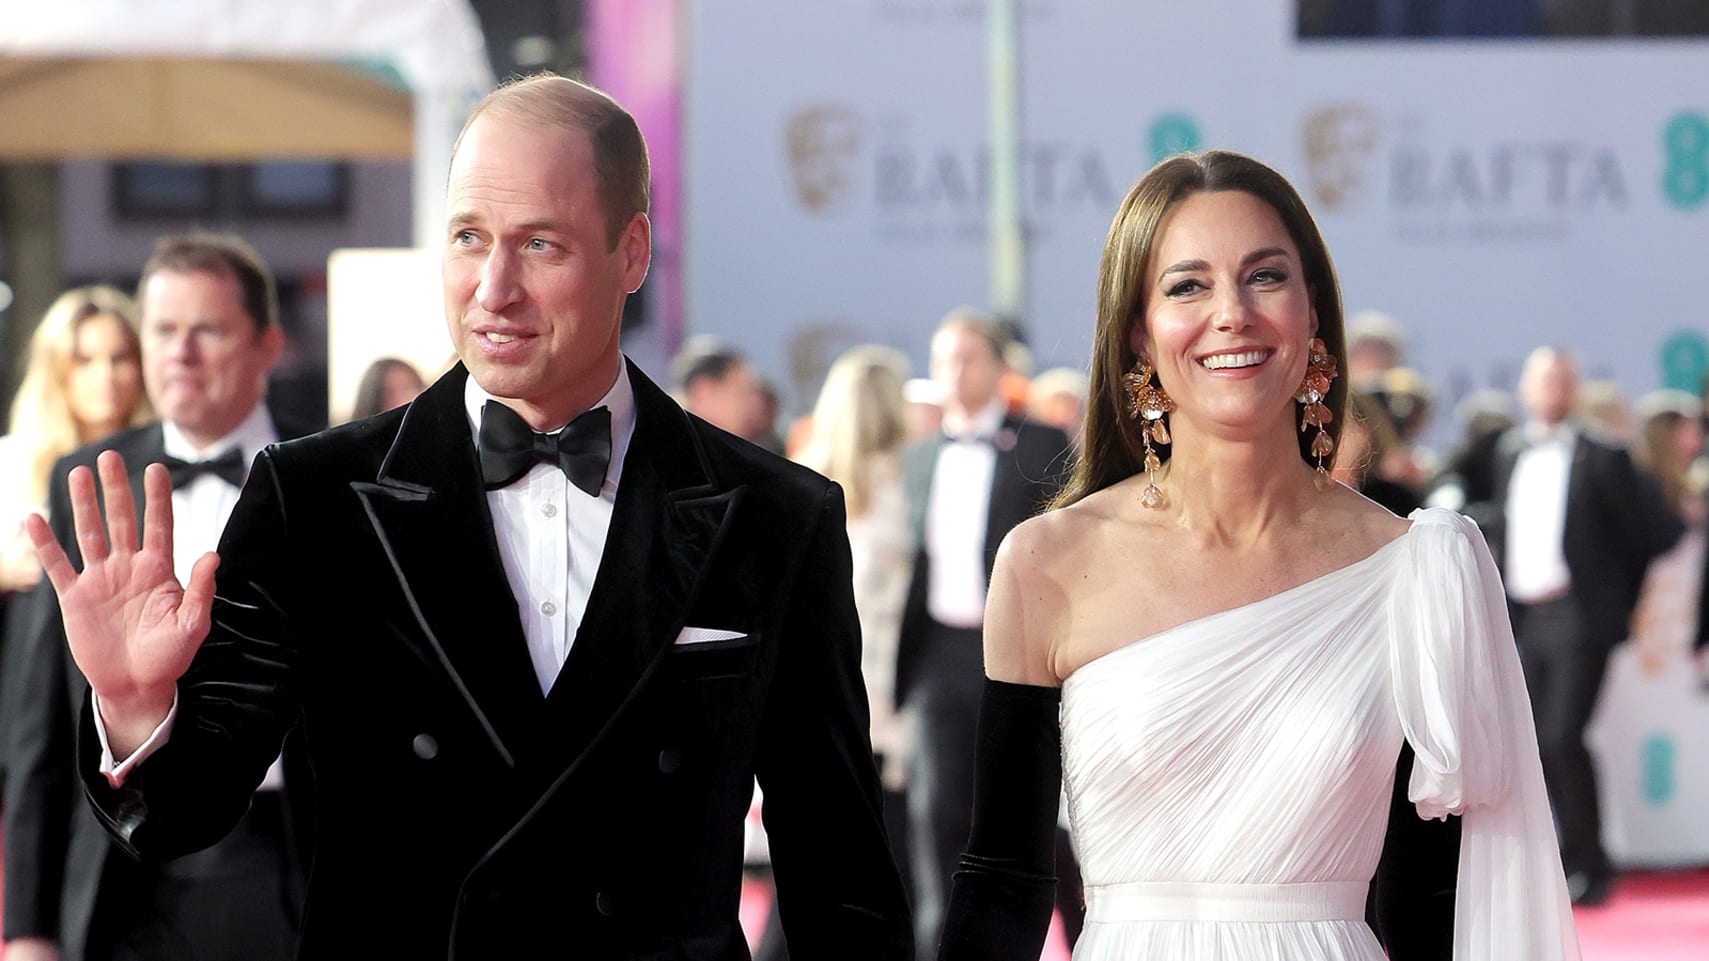 Kate Middleton wears $28 earrings — and stunningly beautiful dress — at the BAFTAs 💃